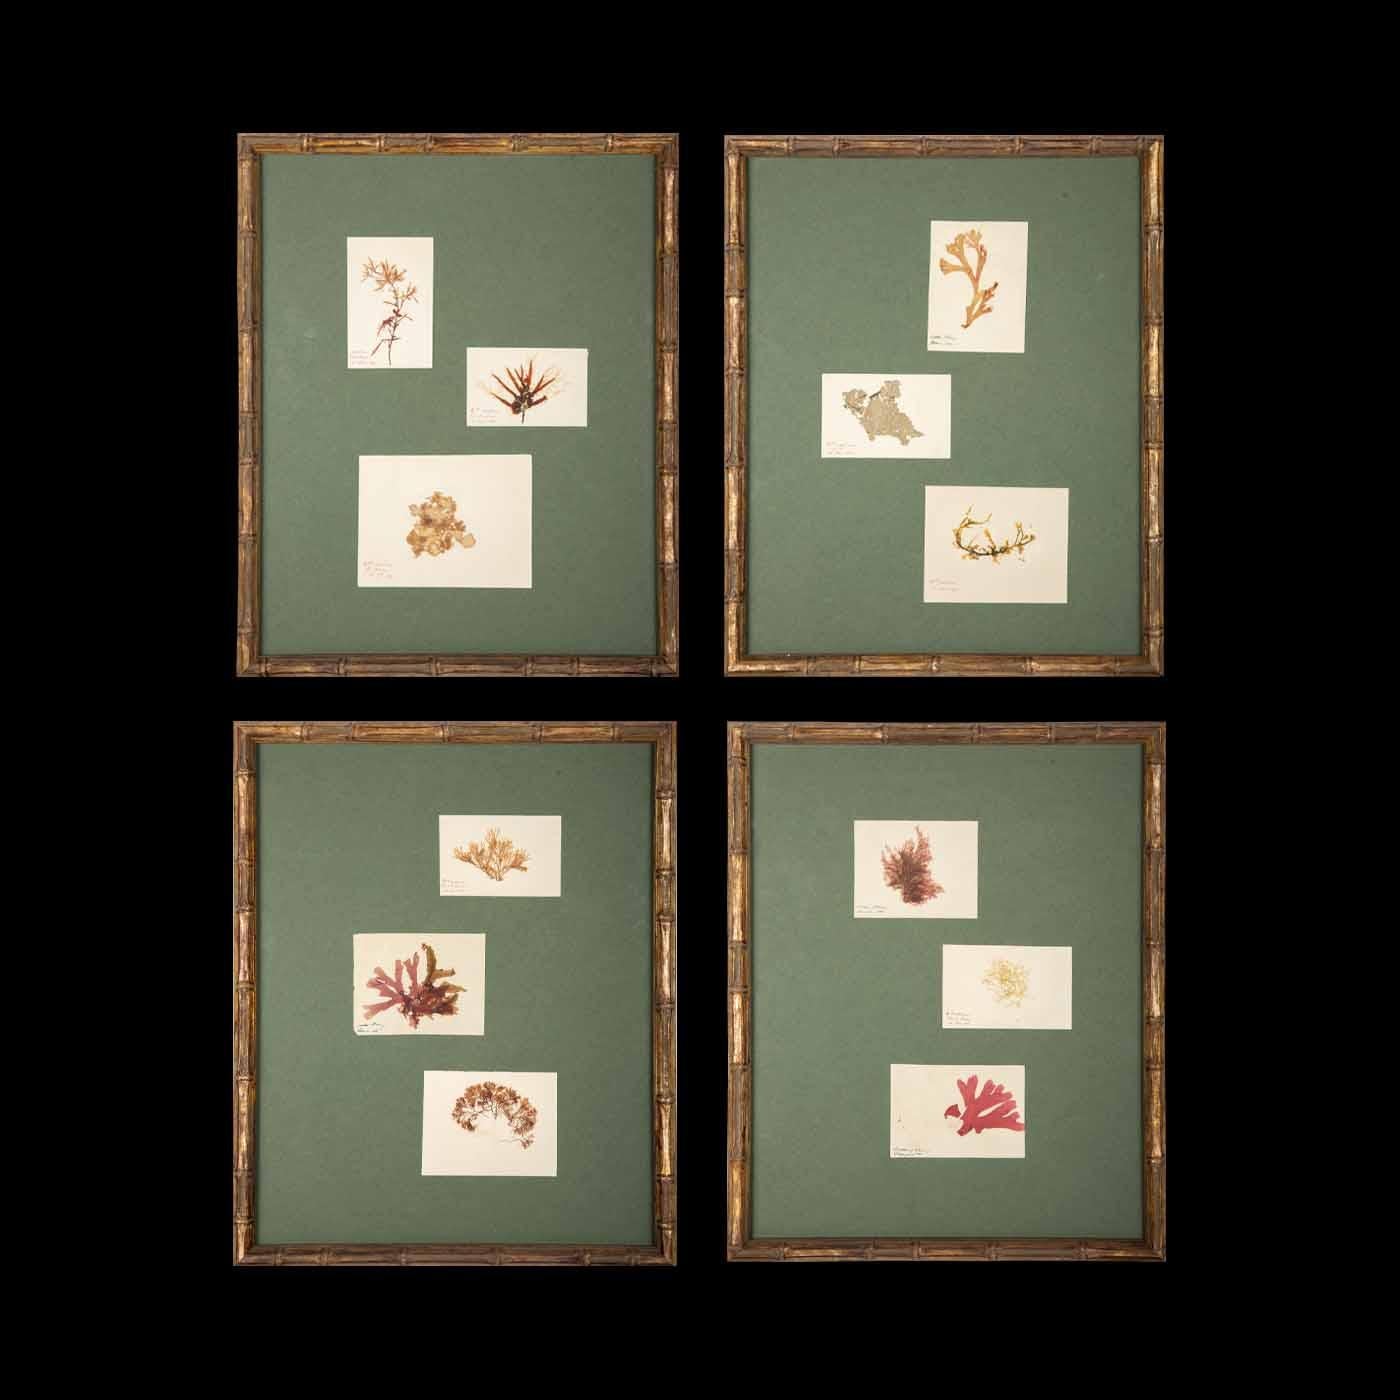 This is a set of late 19th-century French Alguier (Herbier) specimens of pressed seaweed, mounted and framed. The specimens were collected from oceans and seas around the world and were originally part of a two-volume collection called 